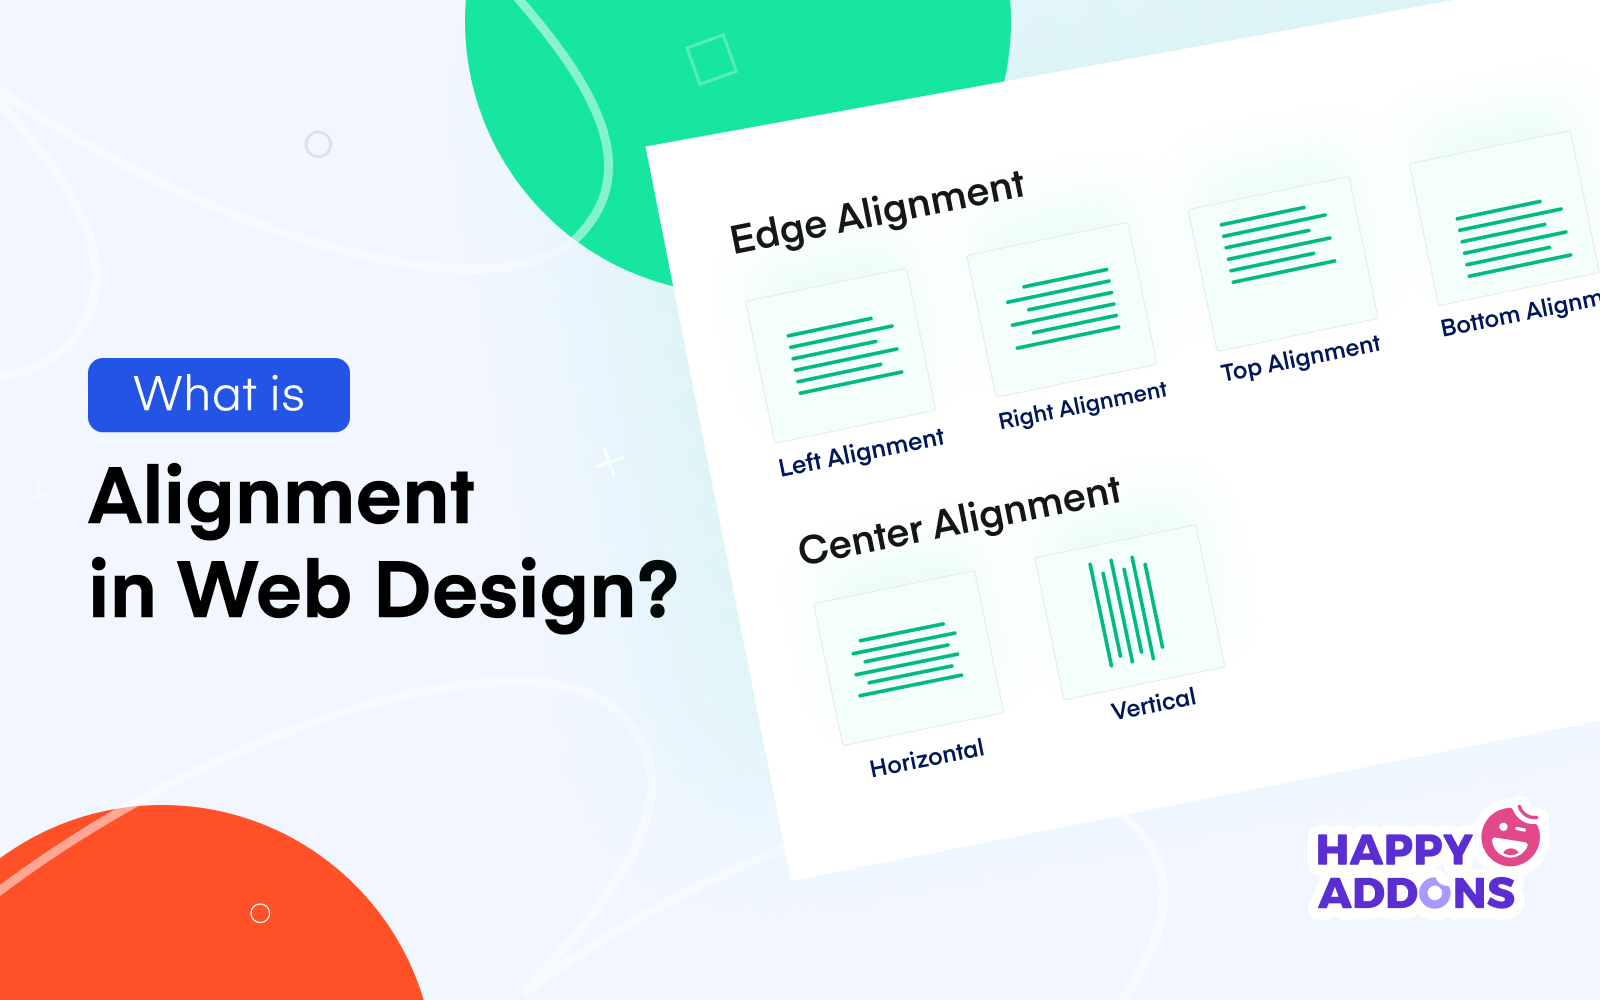 What is Alignment in Web Design